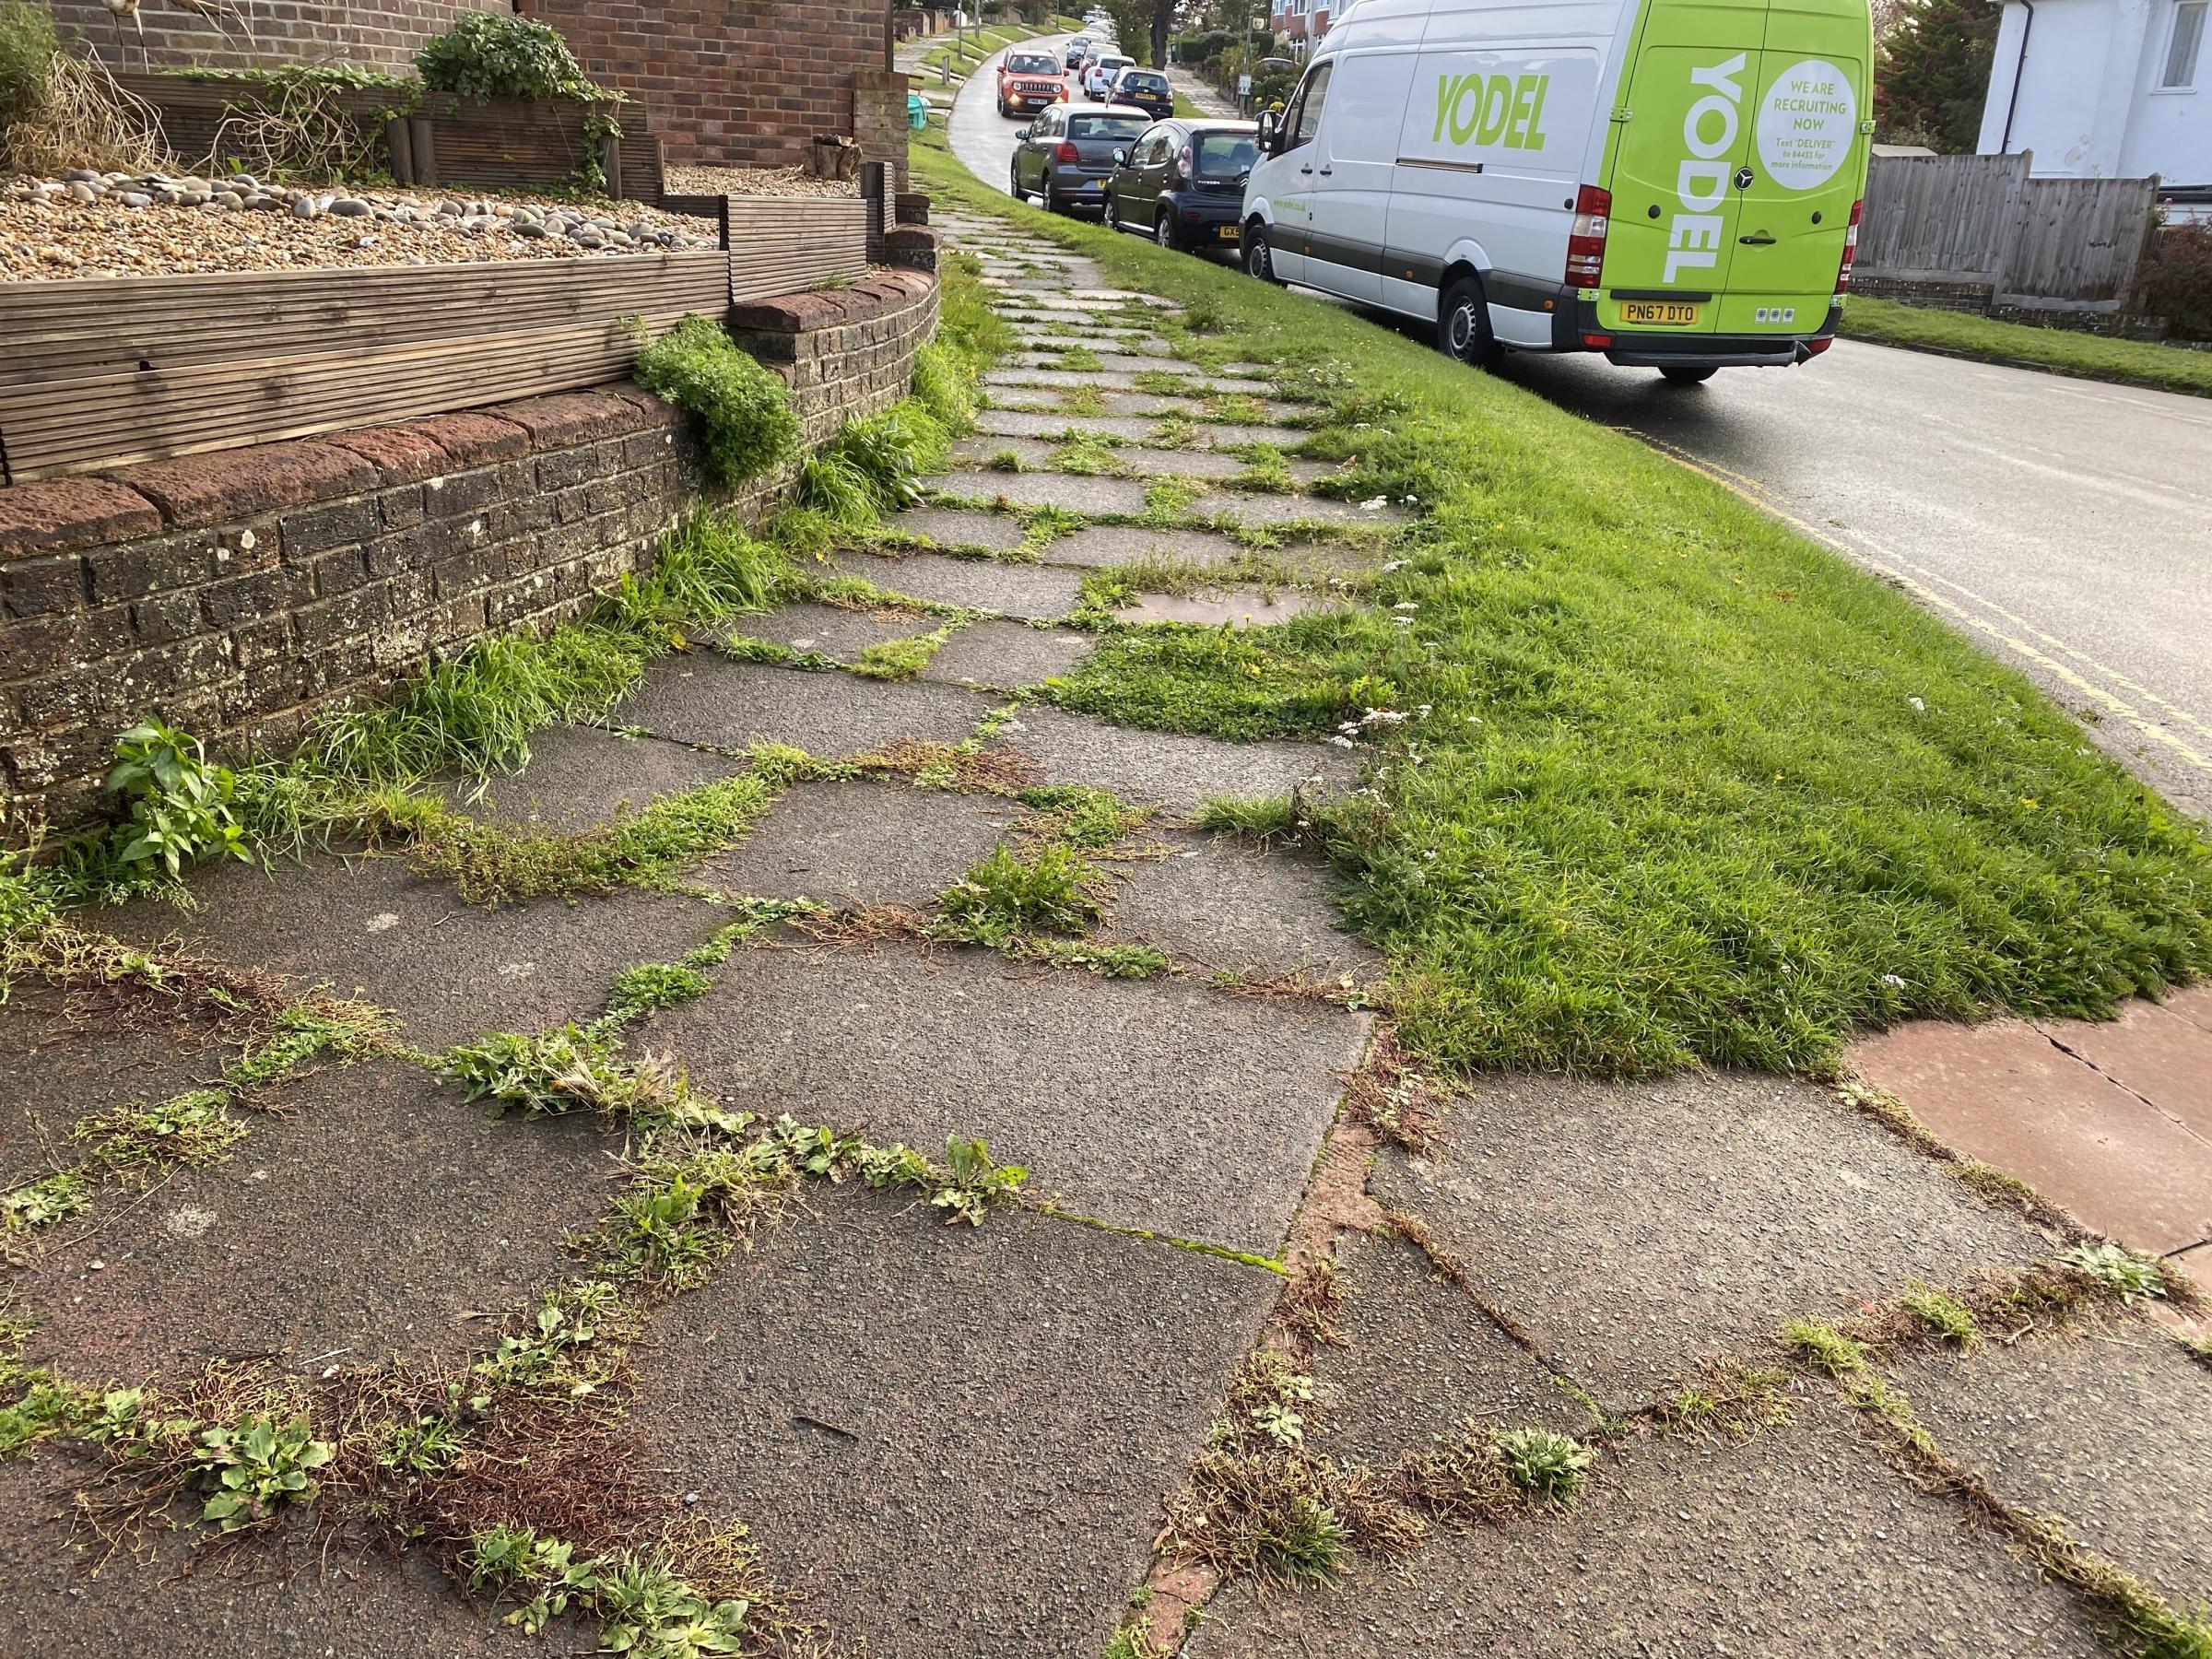 Weeds in the pavement at Greenfield Crescent (2020)